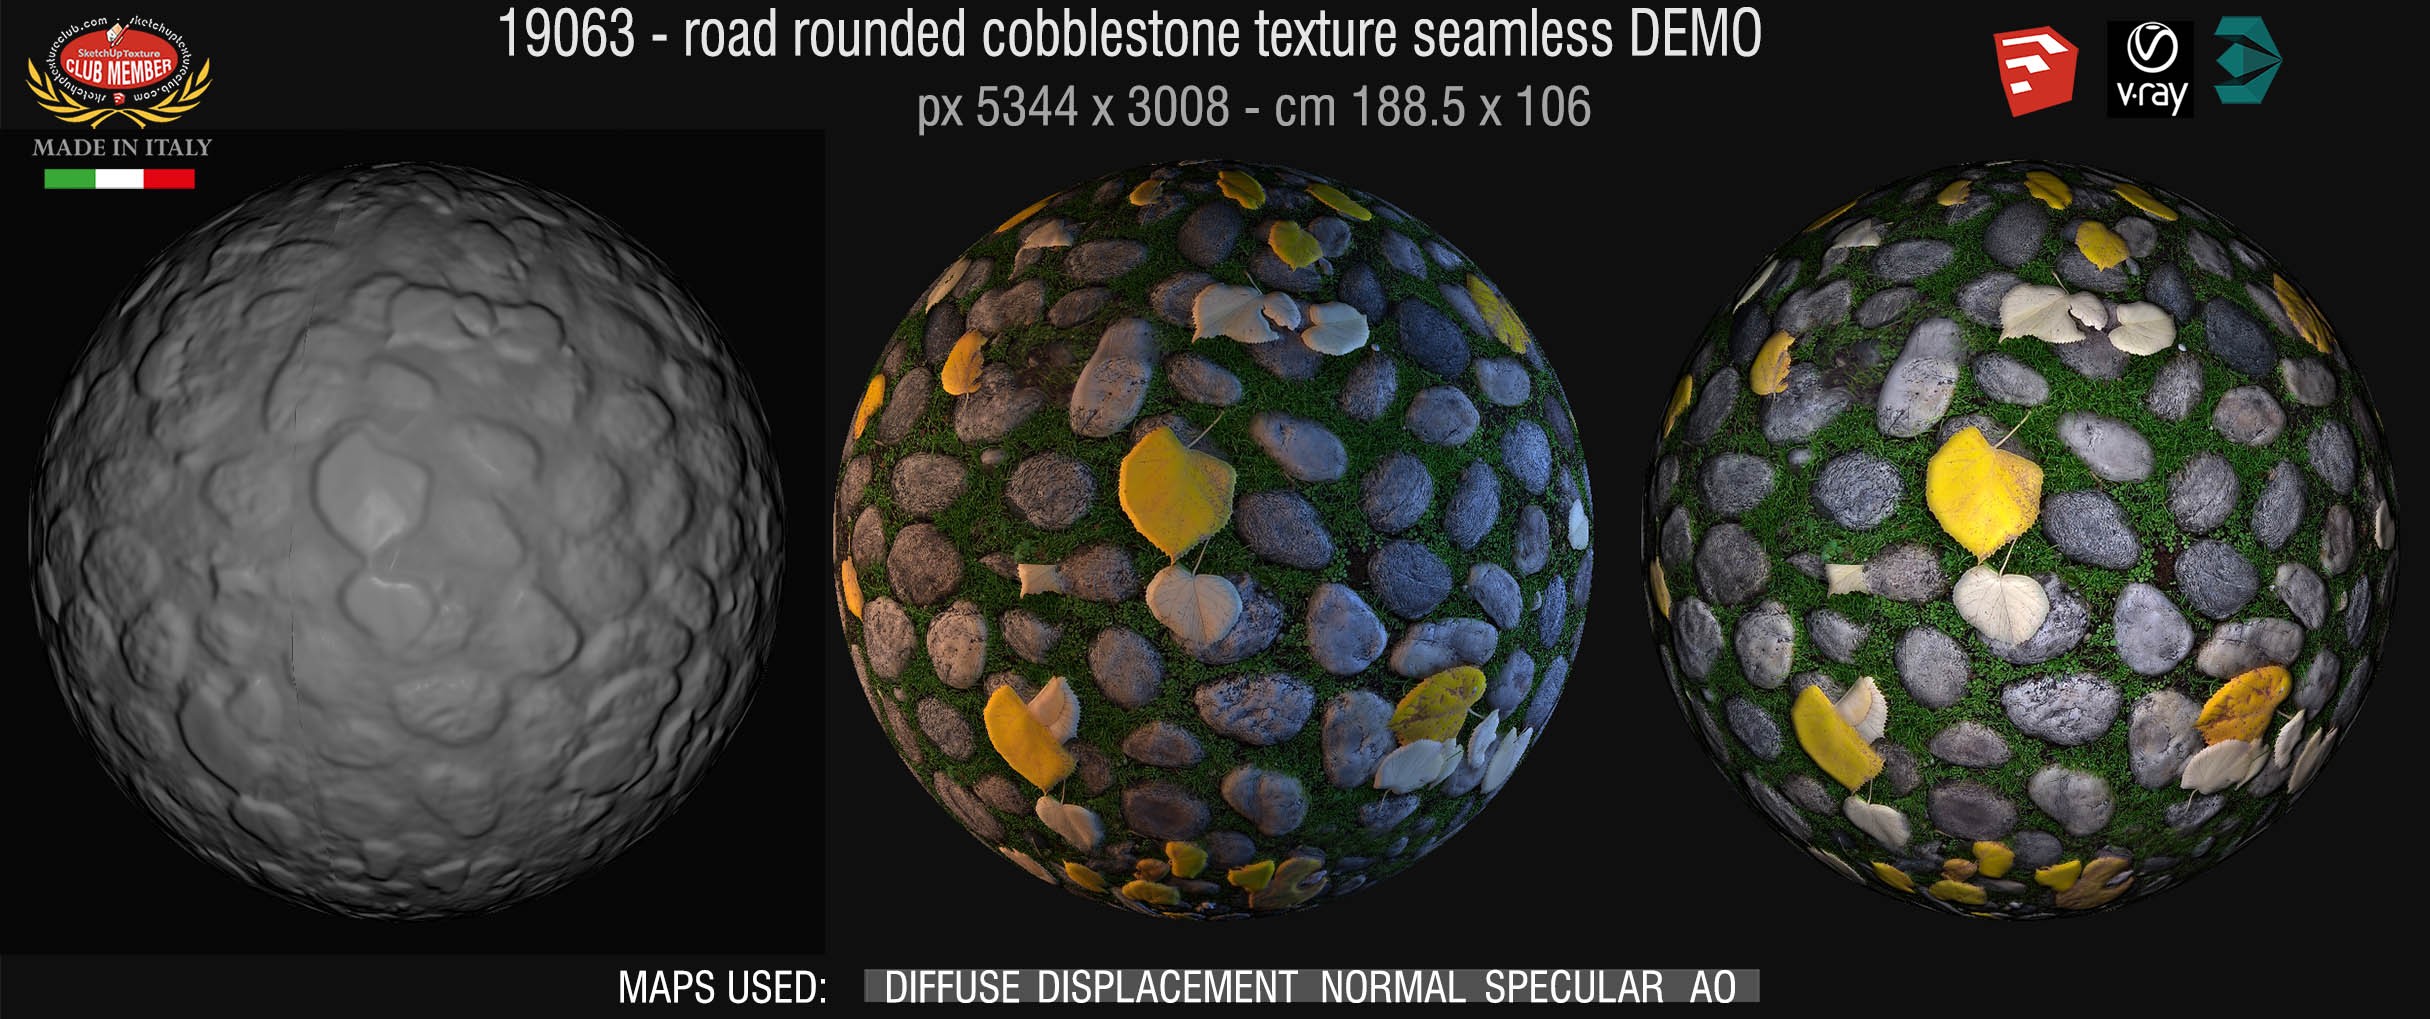 19063 Rounded cobblestone with dead leaves texture seamless + maps DEMO